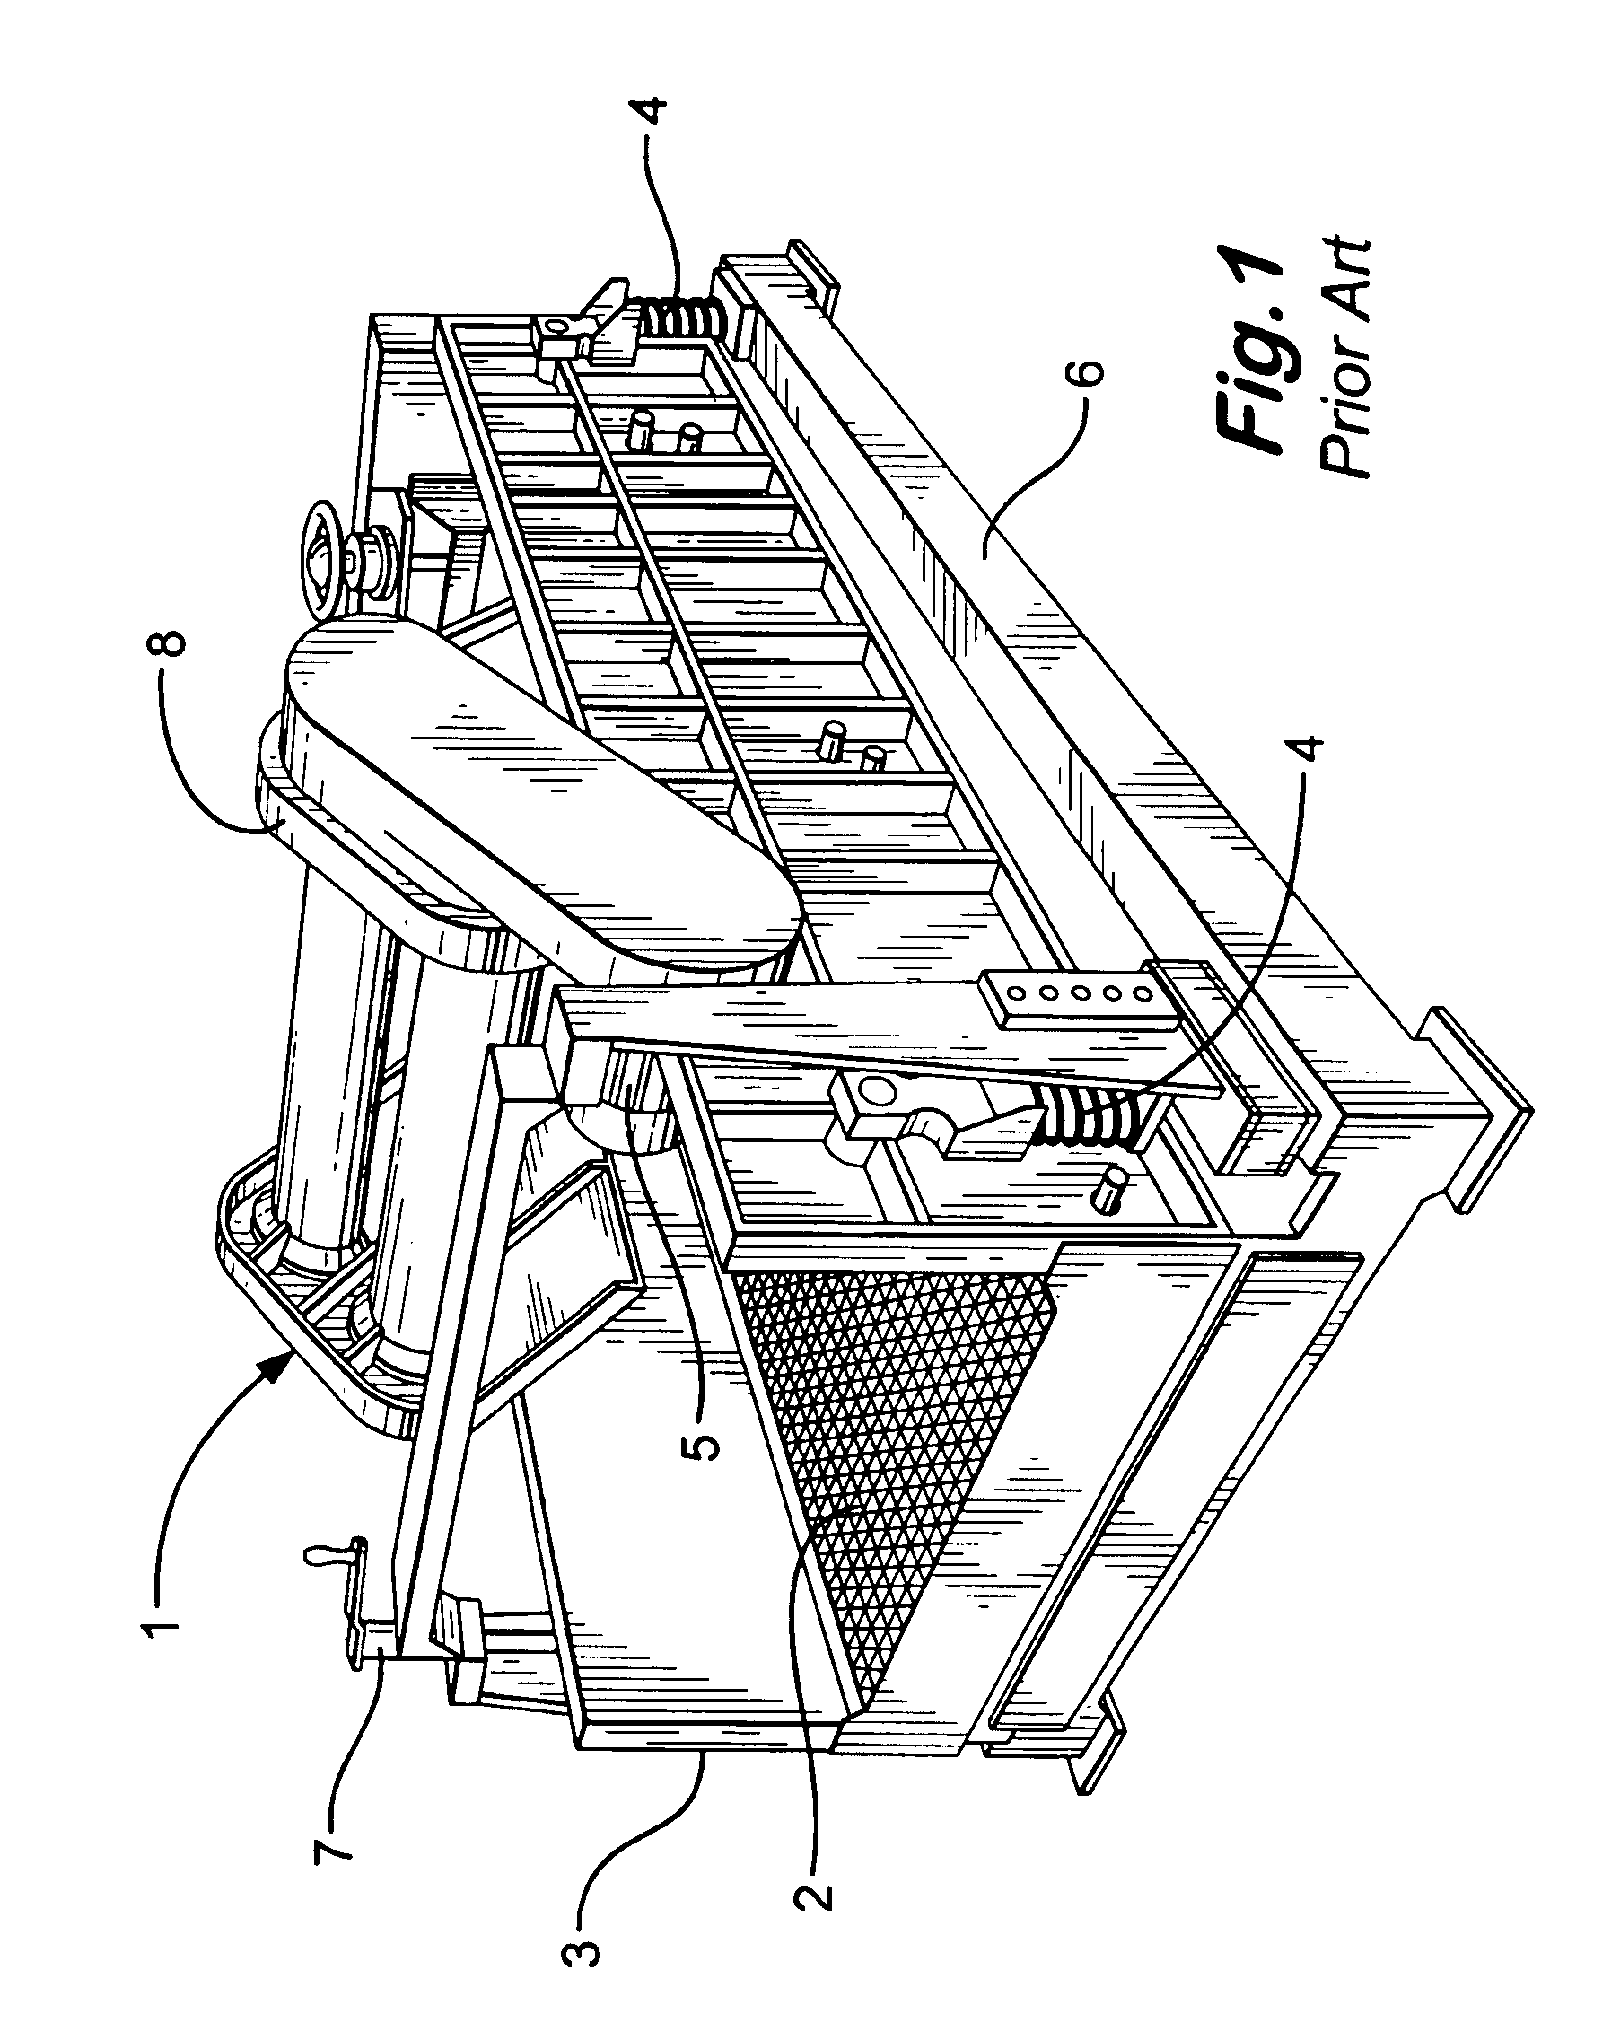 Centrally supported screen assembly